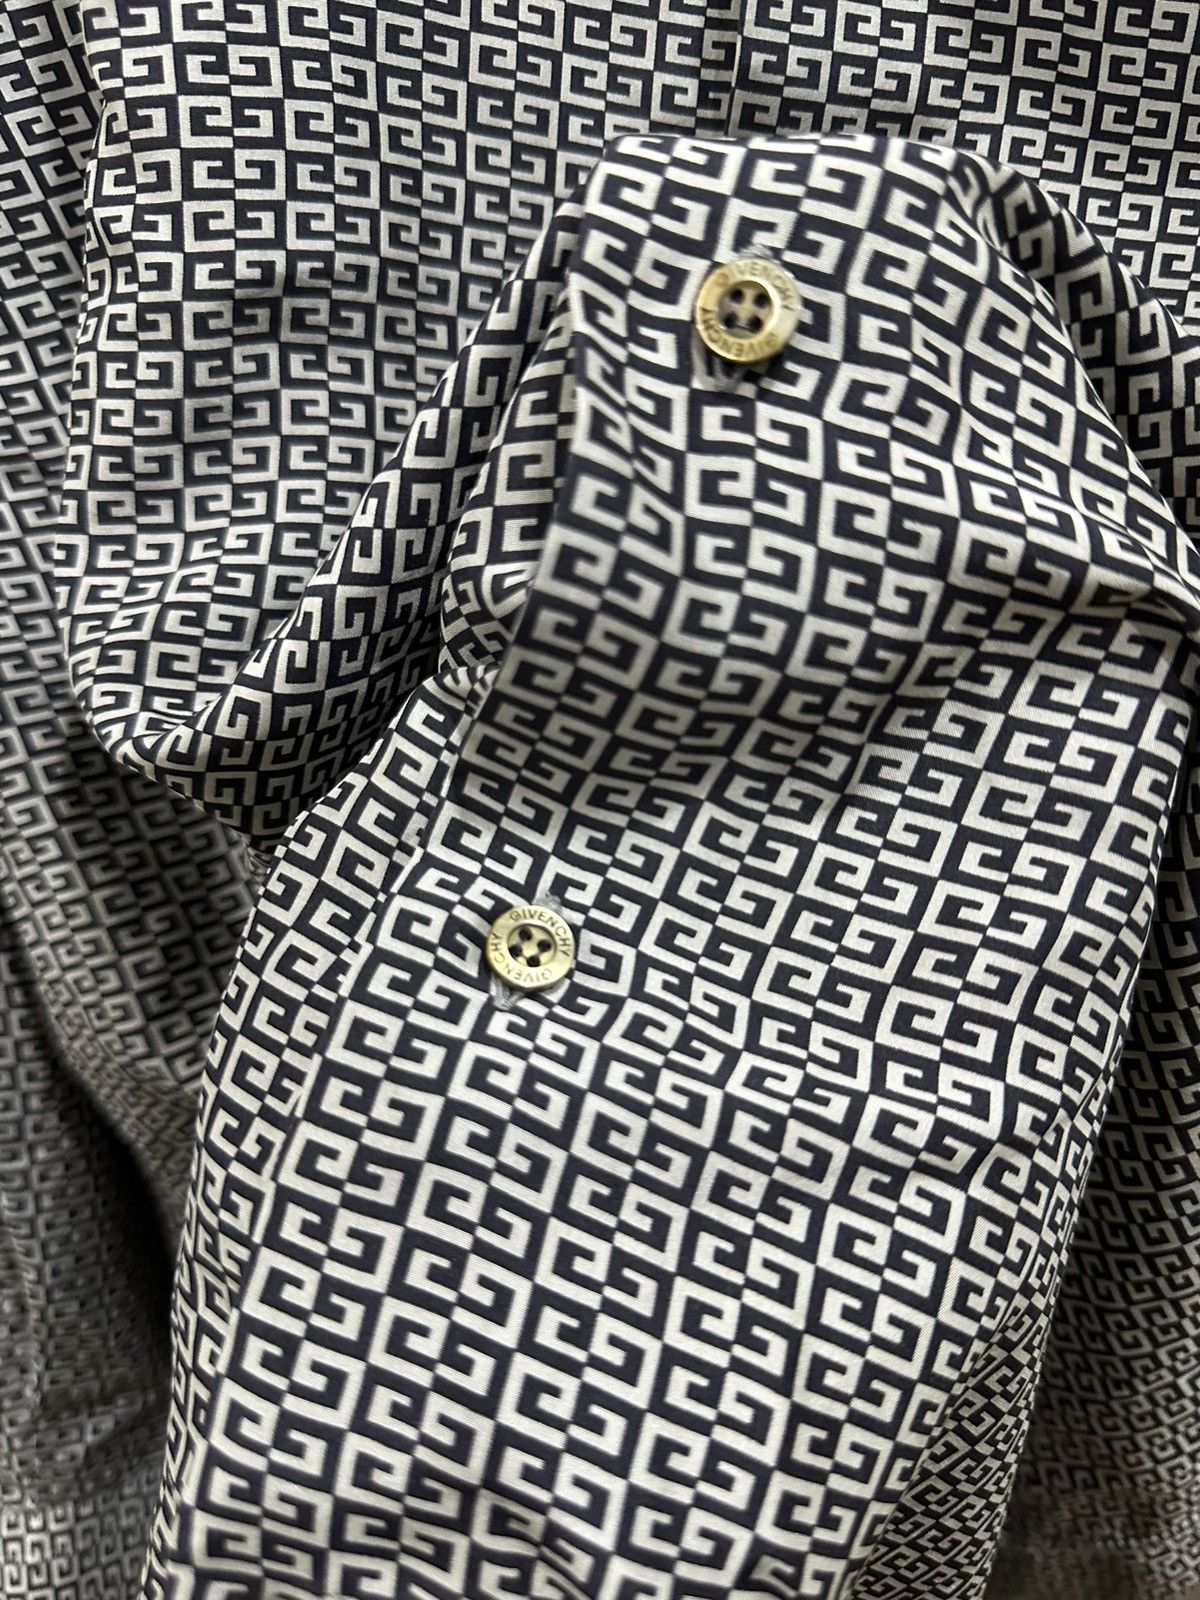 Givenchy Made in Italy Monogram Silk Button Shirt - 5